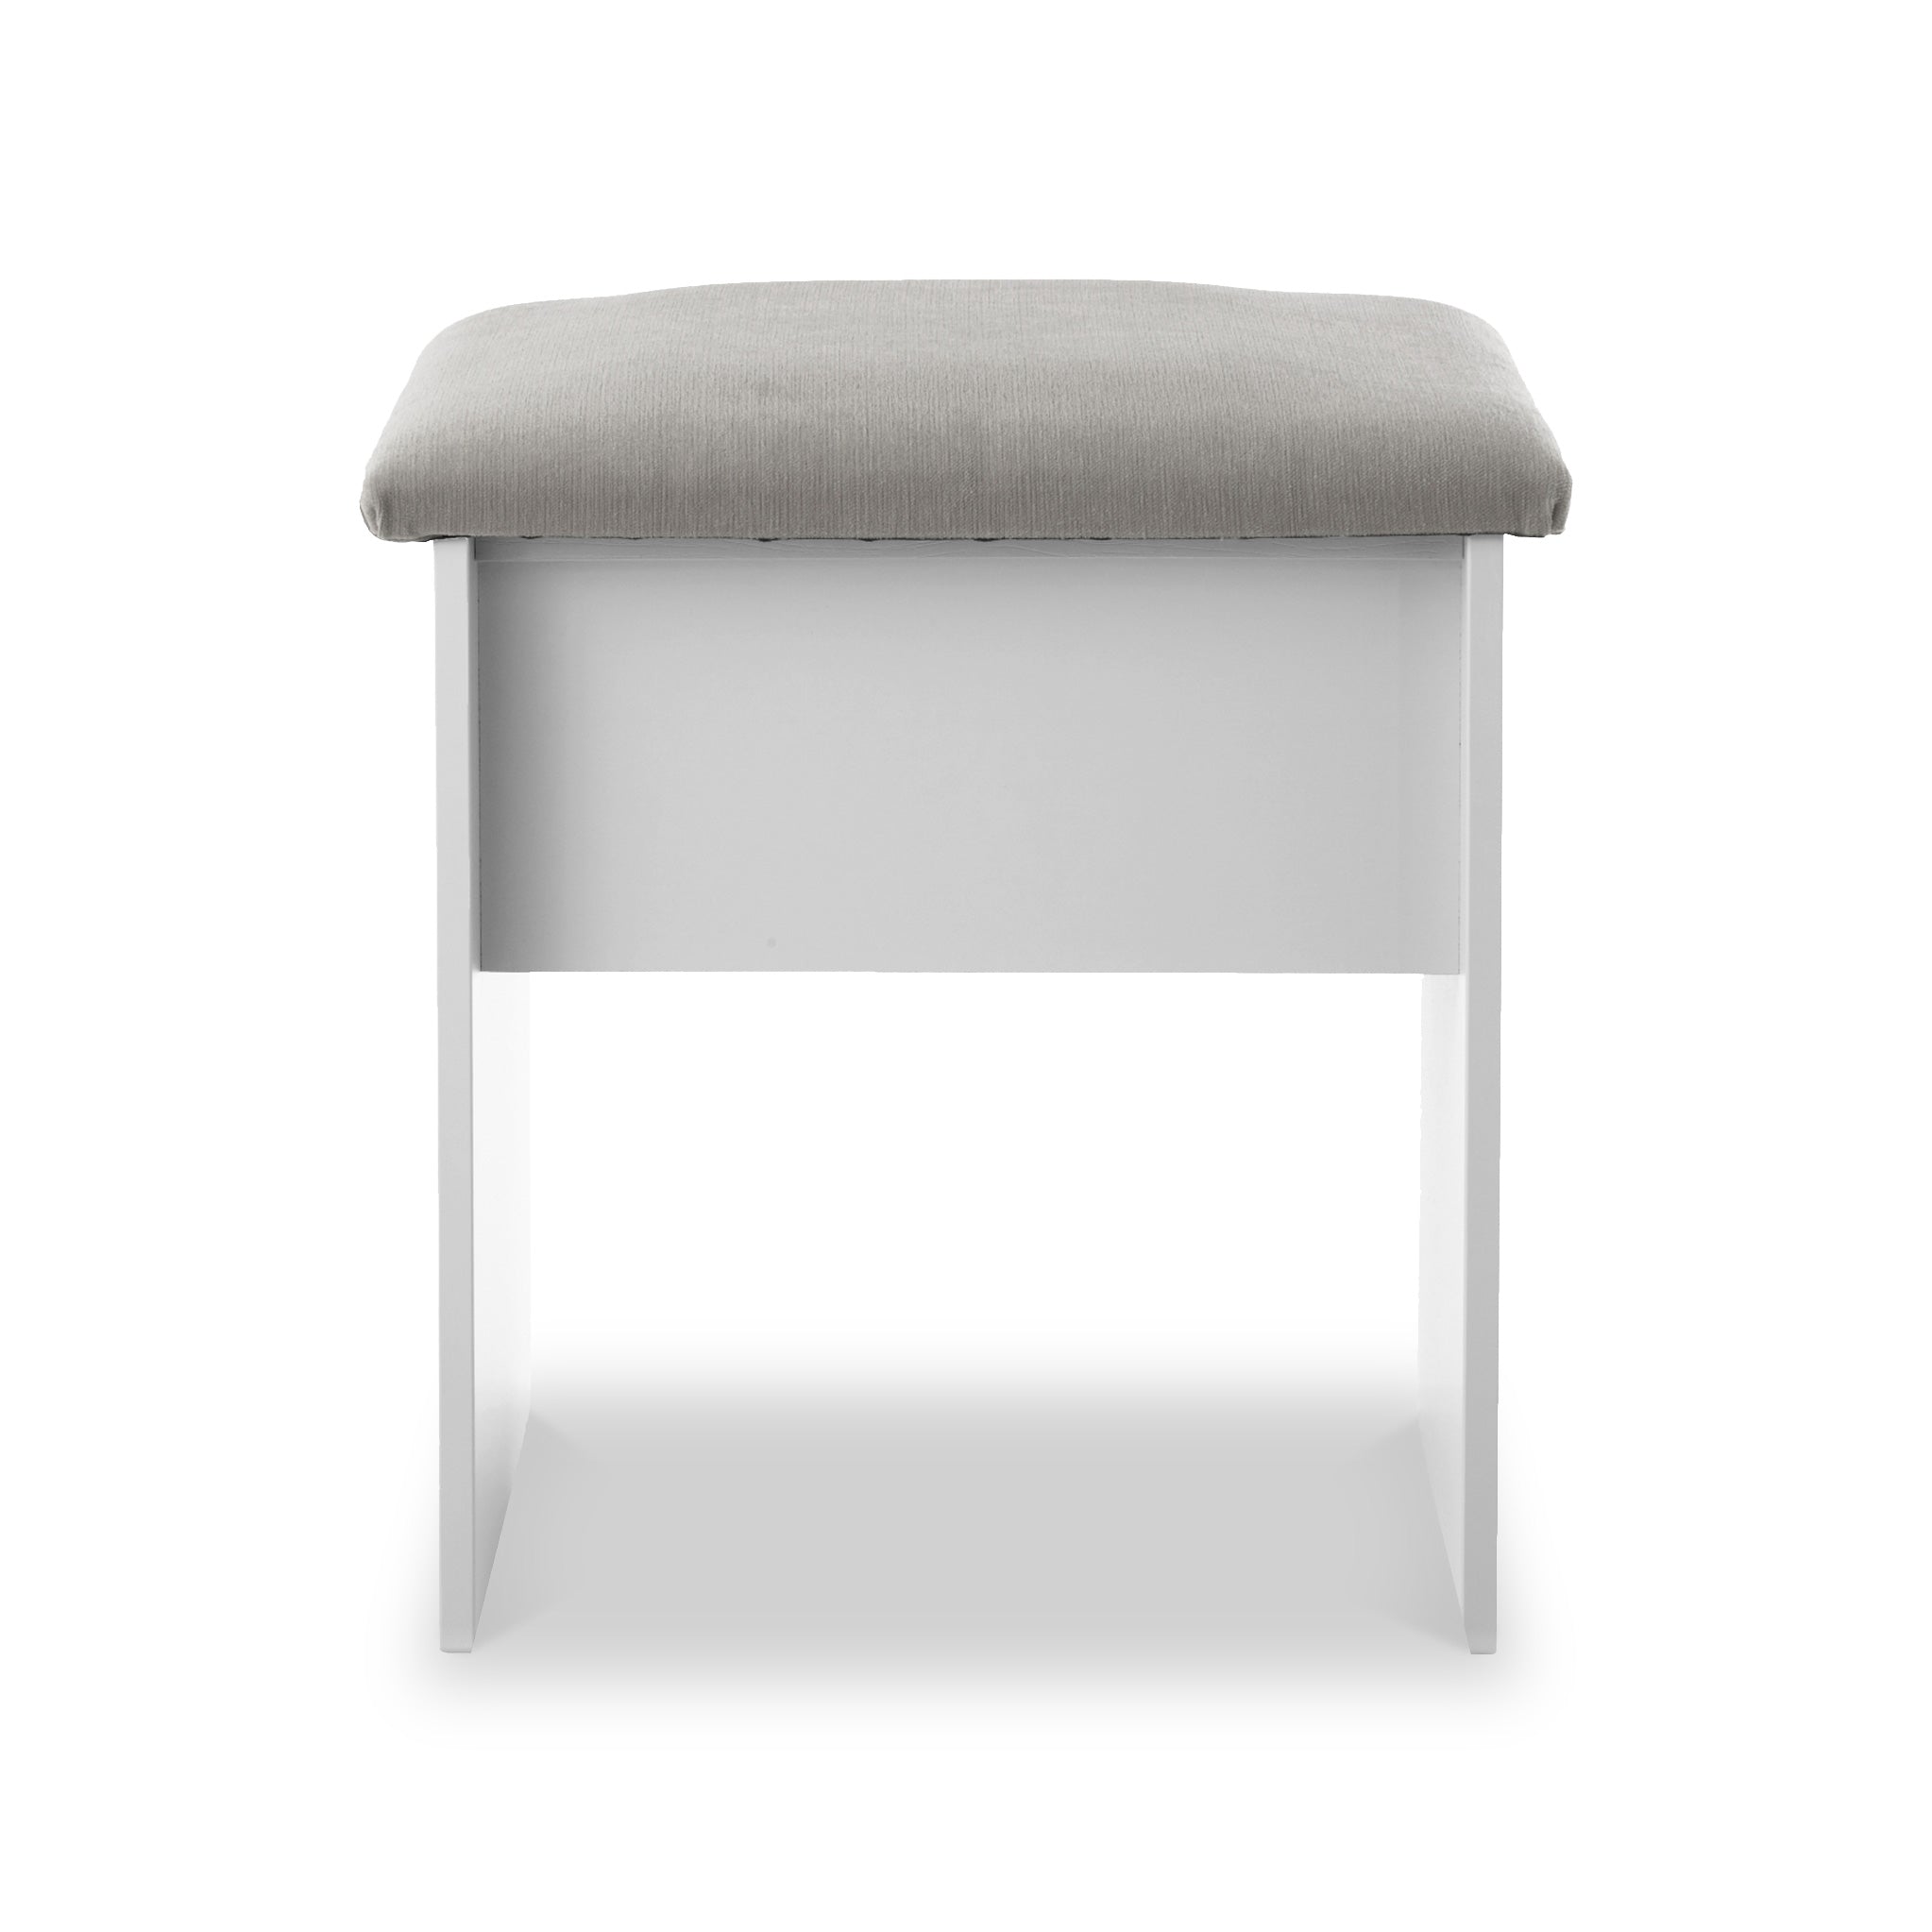 Talland Stool Contemporary Chair For Bedroom Roseland